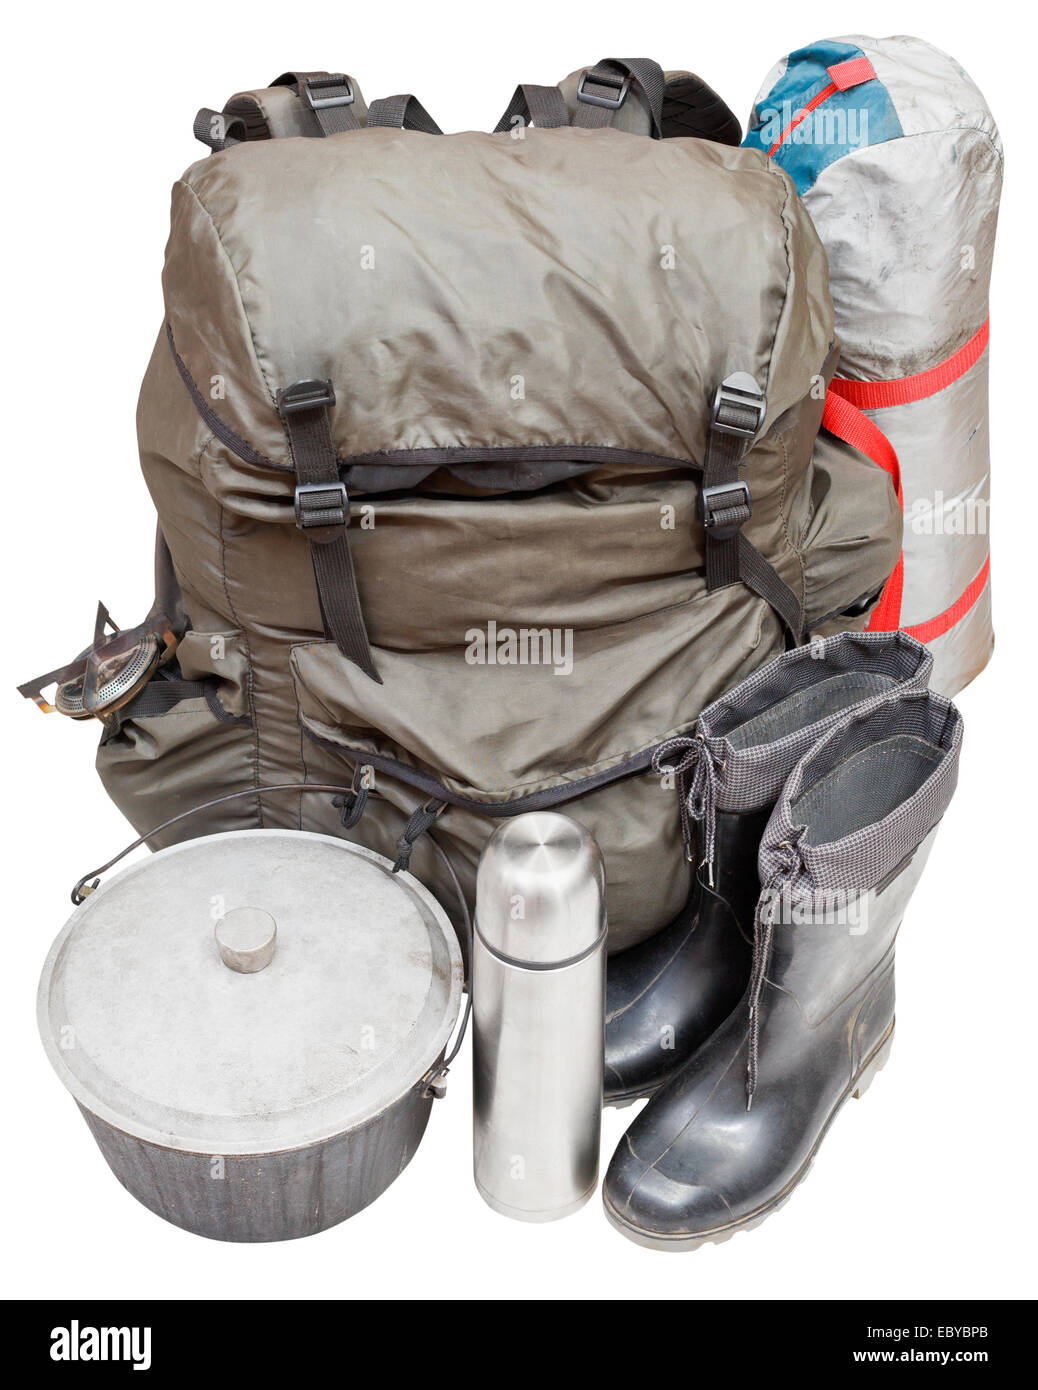 Camping Gear stock image. Image of green, bags, isolated - 25173485